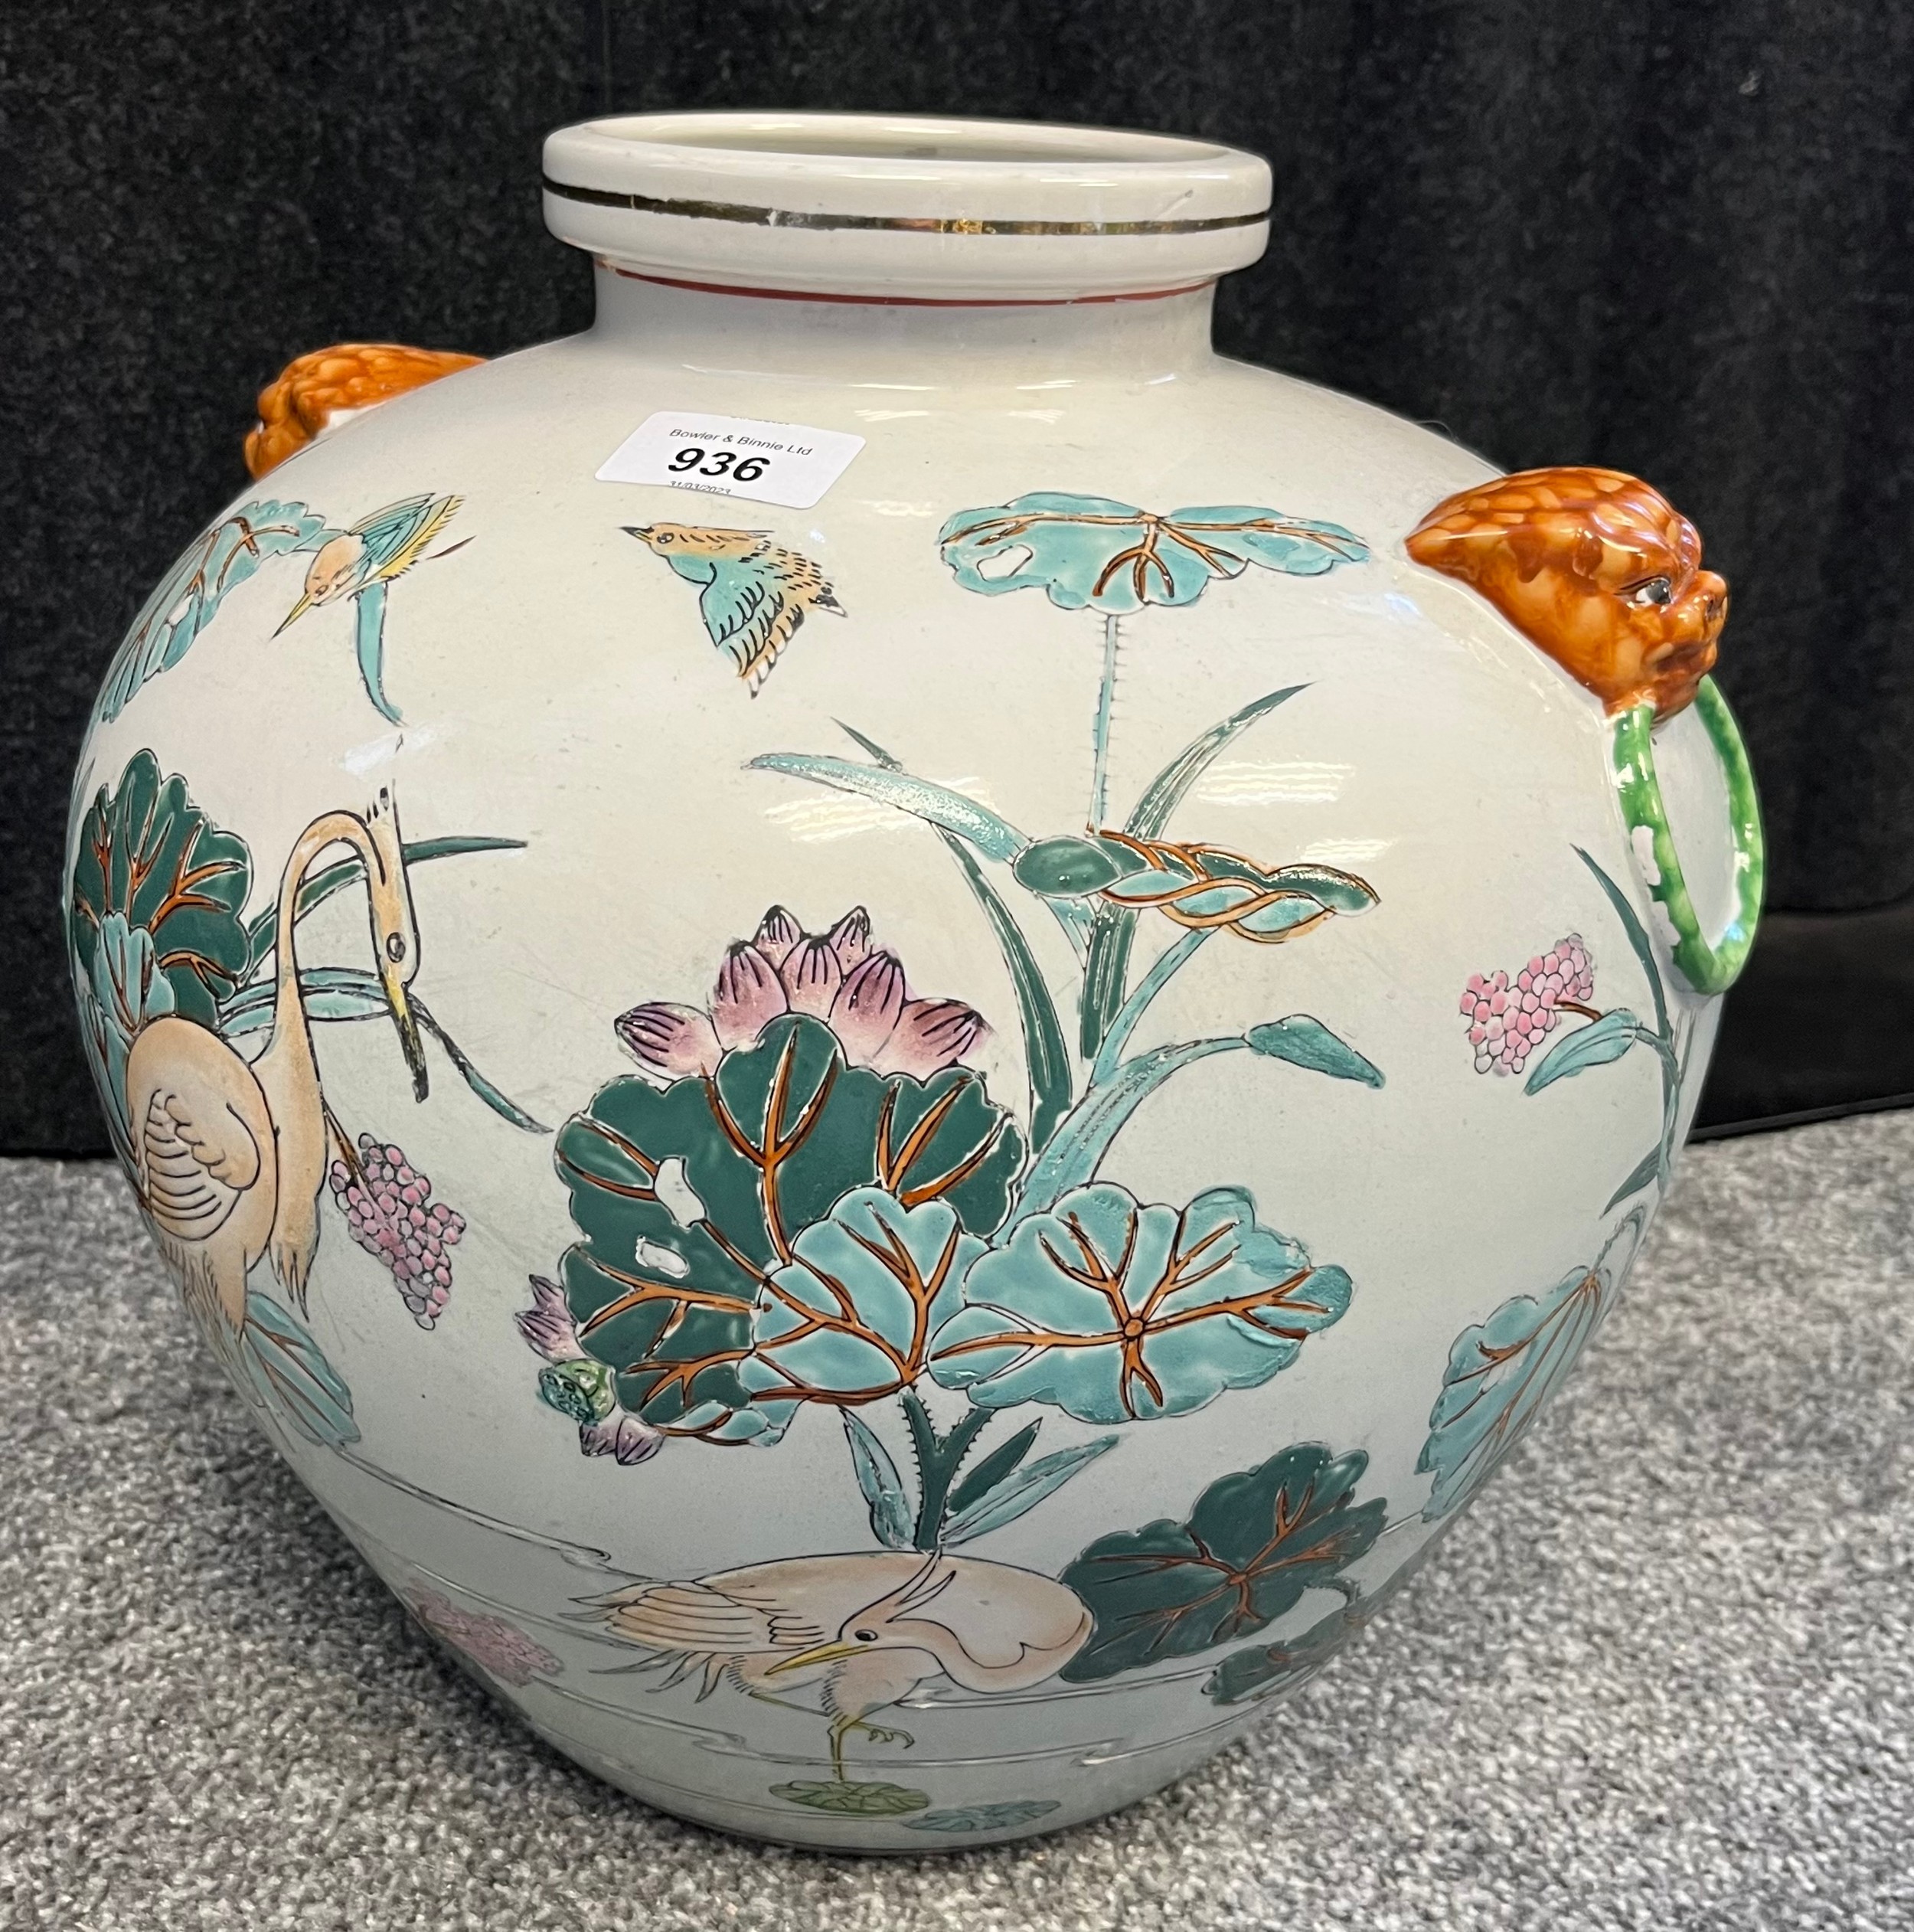 20th century Chinese bulbous vase depicting floral and bird design. [28cm high]